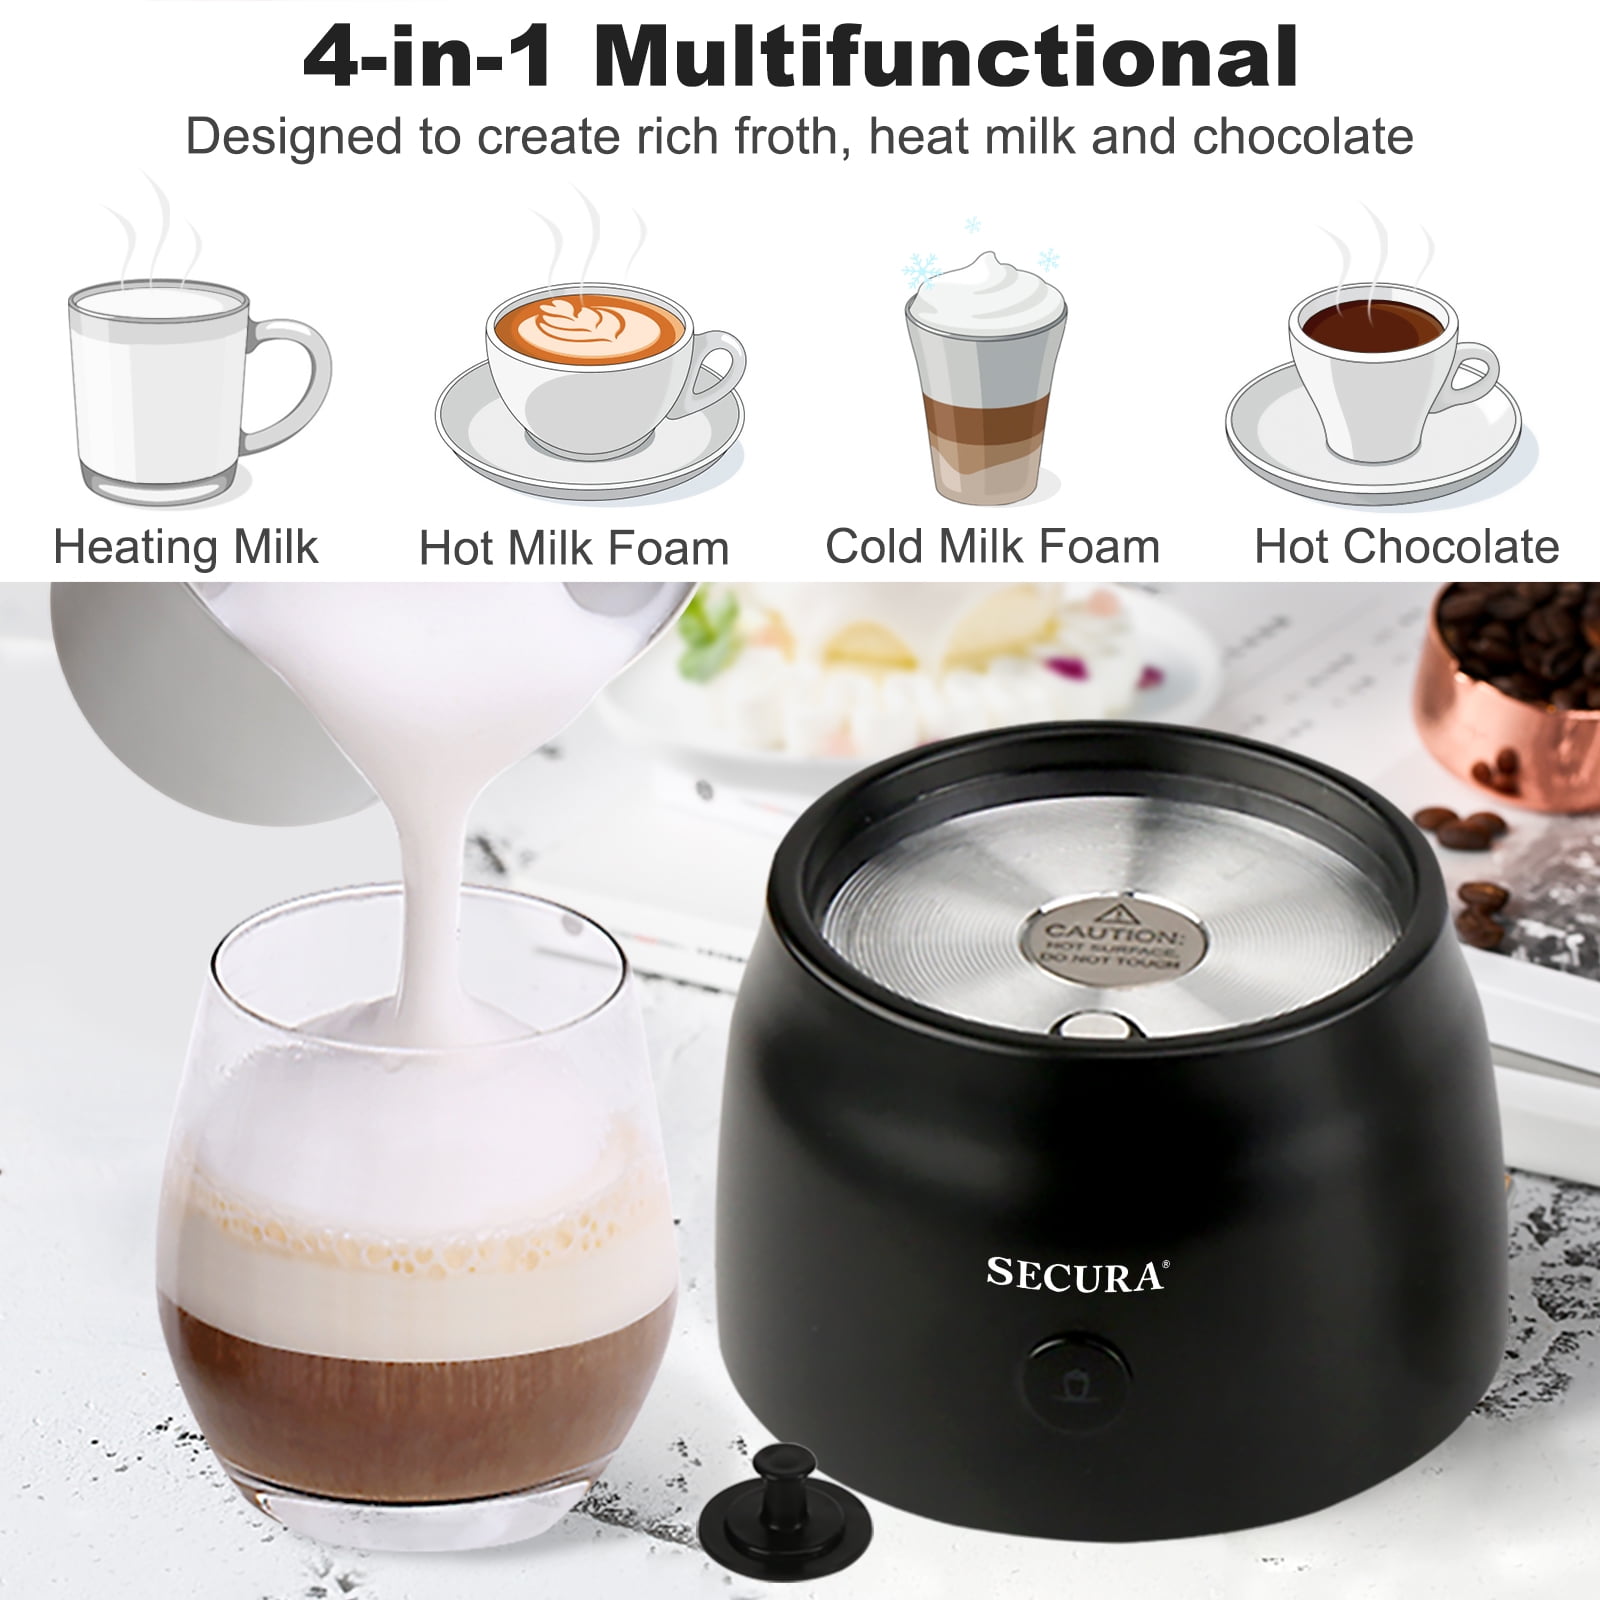  Secura Detachable Milk Frother, 17oz Electric Milk Steamer  Stainless Steel, Automatic Hot/Cold Foam and Hot Chocolate Maker with  Dishwasher Safe, 120V: Home & Kitchen